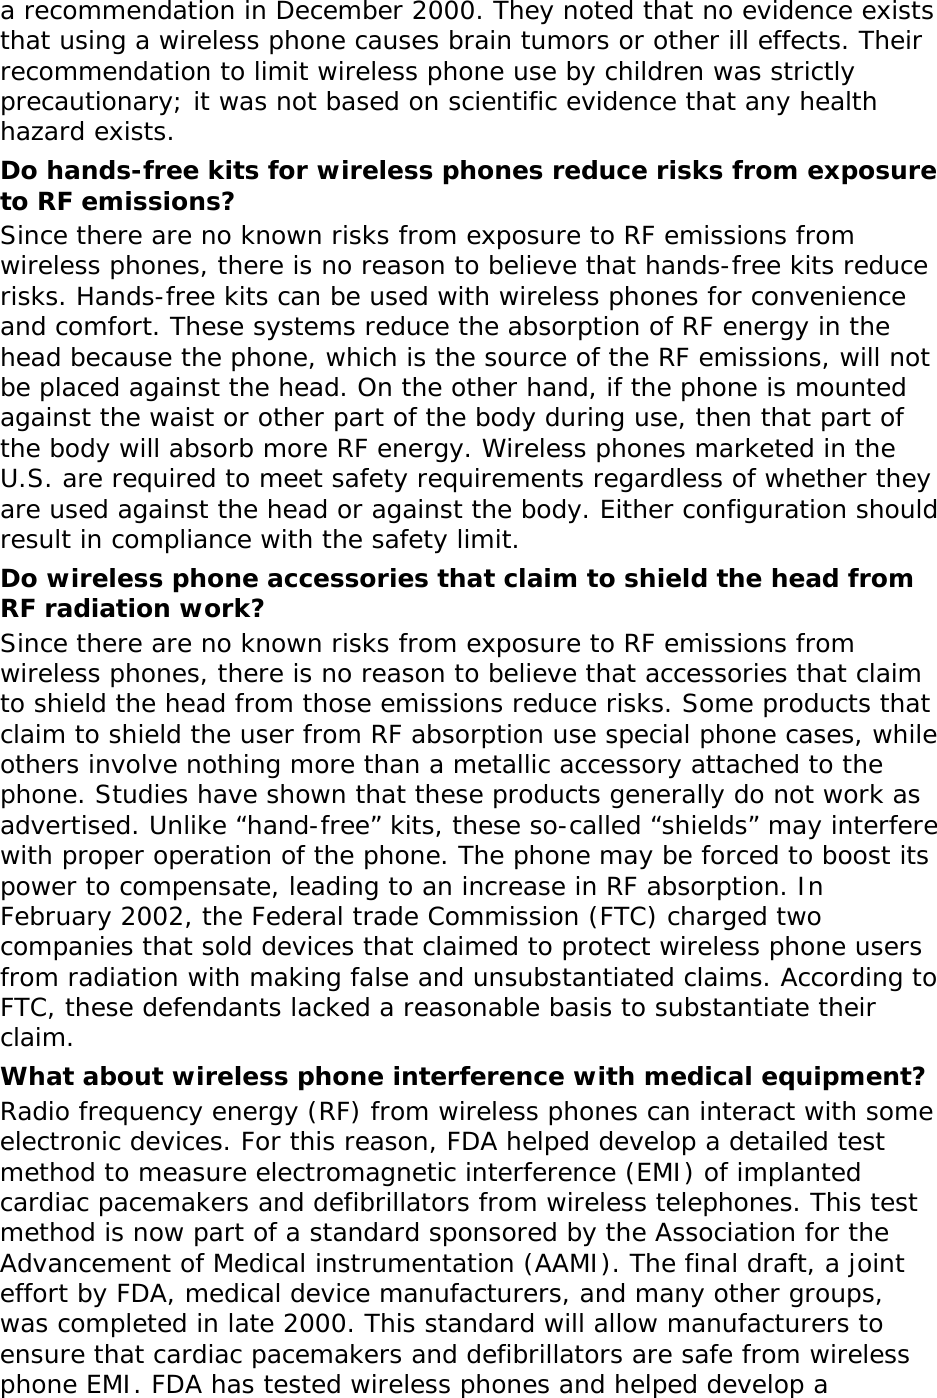 a recommendation in December 2000. They noted that no evidence exists that using a wireless phone causes brain tumors or other ill effects. Their recommendation to limit wireless phone use by children was strictly precautionary; it was not based on scientific evidence that any health hazard exists.  Do hands-free kits for wireless phones reduce risks from exposure to RF emissions? Since there are no known risks from exposure to RF emissions from wireless phones, there is no reason to believe that hands-free kits reduce risks. Hands-free kits can be used with wireless phones for convenience and comfort. These systems reduce the absorption of RF energy in the head because the phone, which is the source of the RF emissions, will not be placed against the head. On the other hand, if the phone is mounted against the waist or other part of the body during use, then that part of the body will absorb more RF energy. Wireless phones marketed in the U.S. are required to meet safety requirements regardless of whether they are used against the head or against the body. Either configuration should result in compliance with the safety limit. Do wireless phone accessories that claim to shield the head from RF radiation work? Since there are no known risks from exposure to RF emissions from wireless phones, there is no reason to believe that accessories that claim to shield the head from those emissions reduce risks. Some products that claim to shield the user from RF absorption use special phone cases, while others involve nothing more than a metallic accessory attached to the phone. Studies have shown that these products generally do not work as advertised. Unlike “hand-free” kits, these so-called “shields” may interfere with proper operation of the phone. The phone may be forced to boost its power to compensate, leading to an increase in RF absorption. In February 2002, the Federal trade Commission (FTC) charged two companies that sold devices that claimed to protect wireless phone users from radiation with making false and unsubstantiated claims. According to FTC, these defendants lacked a reasonable basis to substantiate their claim. What about wireless phone interference with medical equipment? Radio frequency energy (RF) from wireless phones can interact with some electronic devices. For this reason, FDA helped develop a detailed test method to measure electromagnetic interference (EMI) of implanted cardiac pacemakers and defibrillators from wireless telephones. This test method is now part of a standard sponsored by the Association for the Advancement of Medical instrumentation (AAMI). The final draft, a joint effort by FDA, medical device manufacturers, and many other groups, was completed in late 2000. This standard will allow manufacturers to ensure that cardiac pacemakers and defibrillators are safe from wireless phone EMI. FDA has tested wireless phones and helped develop a 